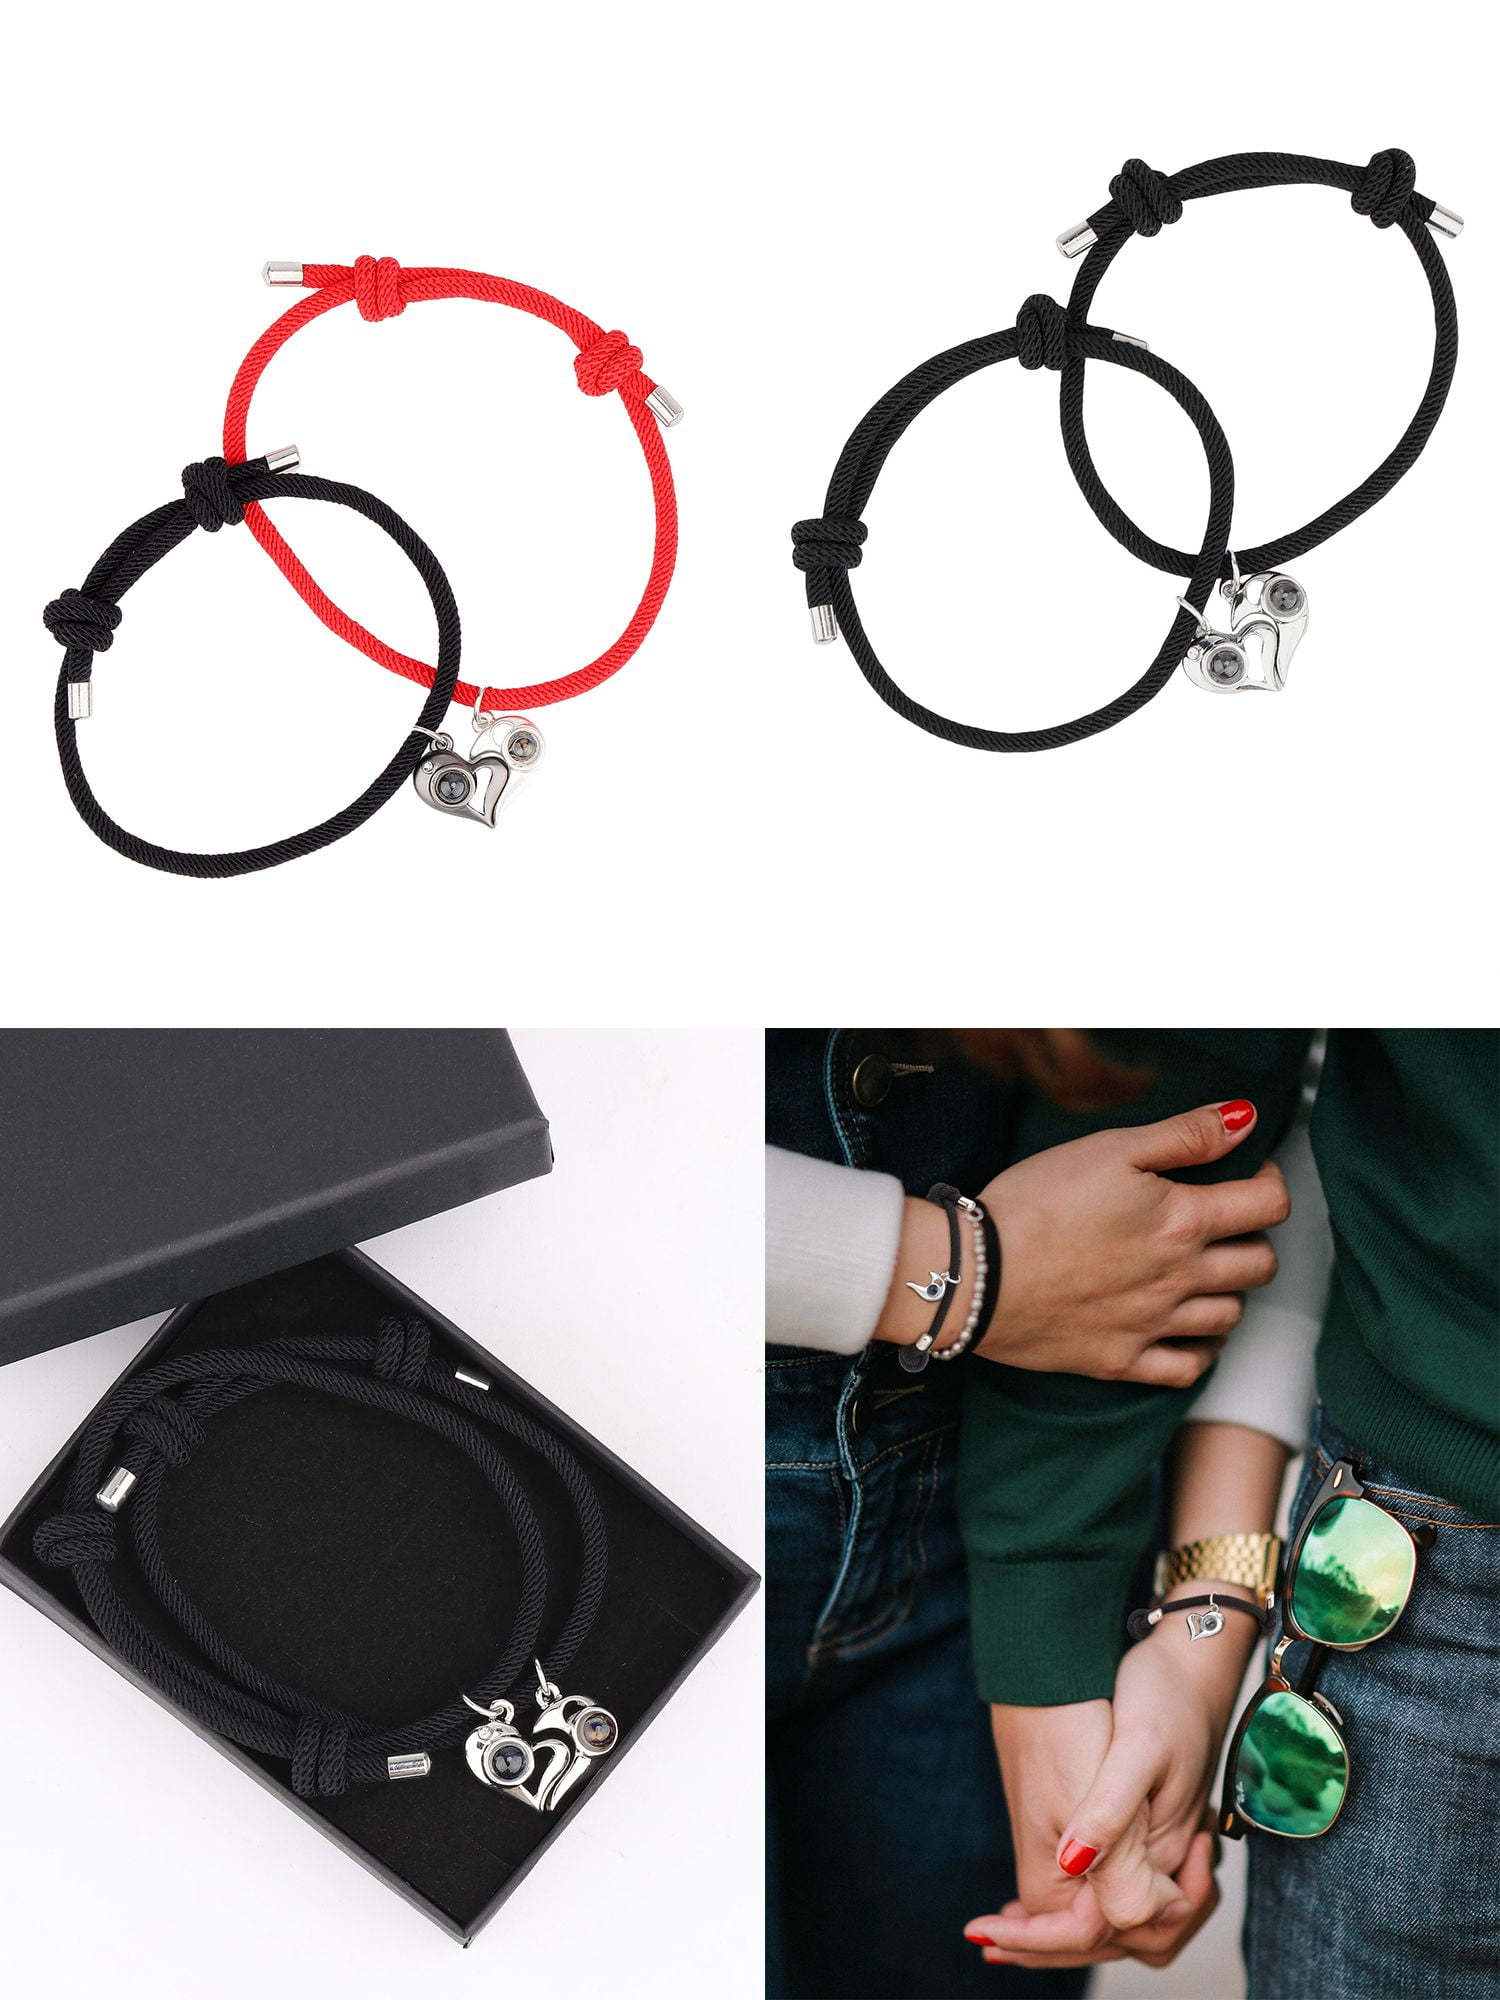 2pcs Couple Magnetic Heart Charm Bracelet for Daily Casual Date,One Size/Silver